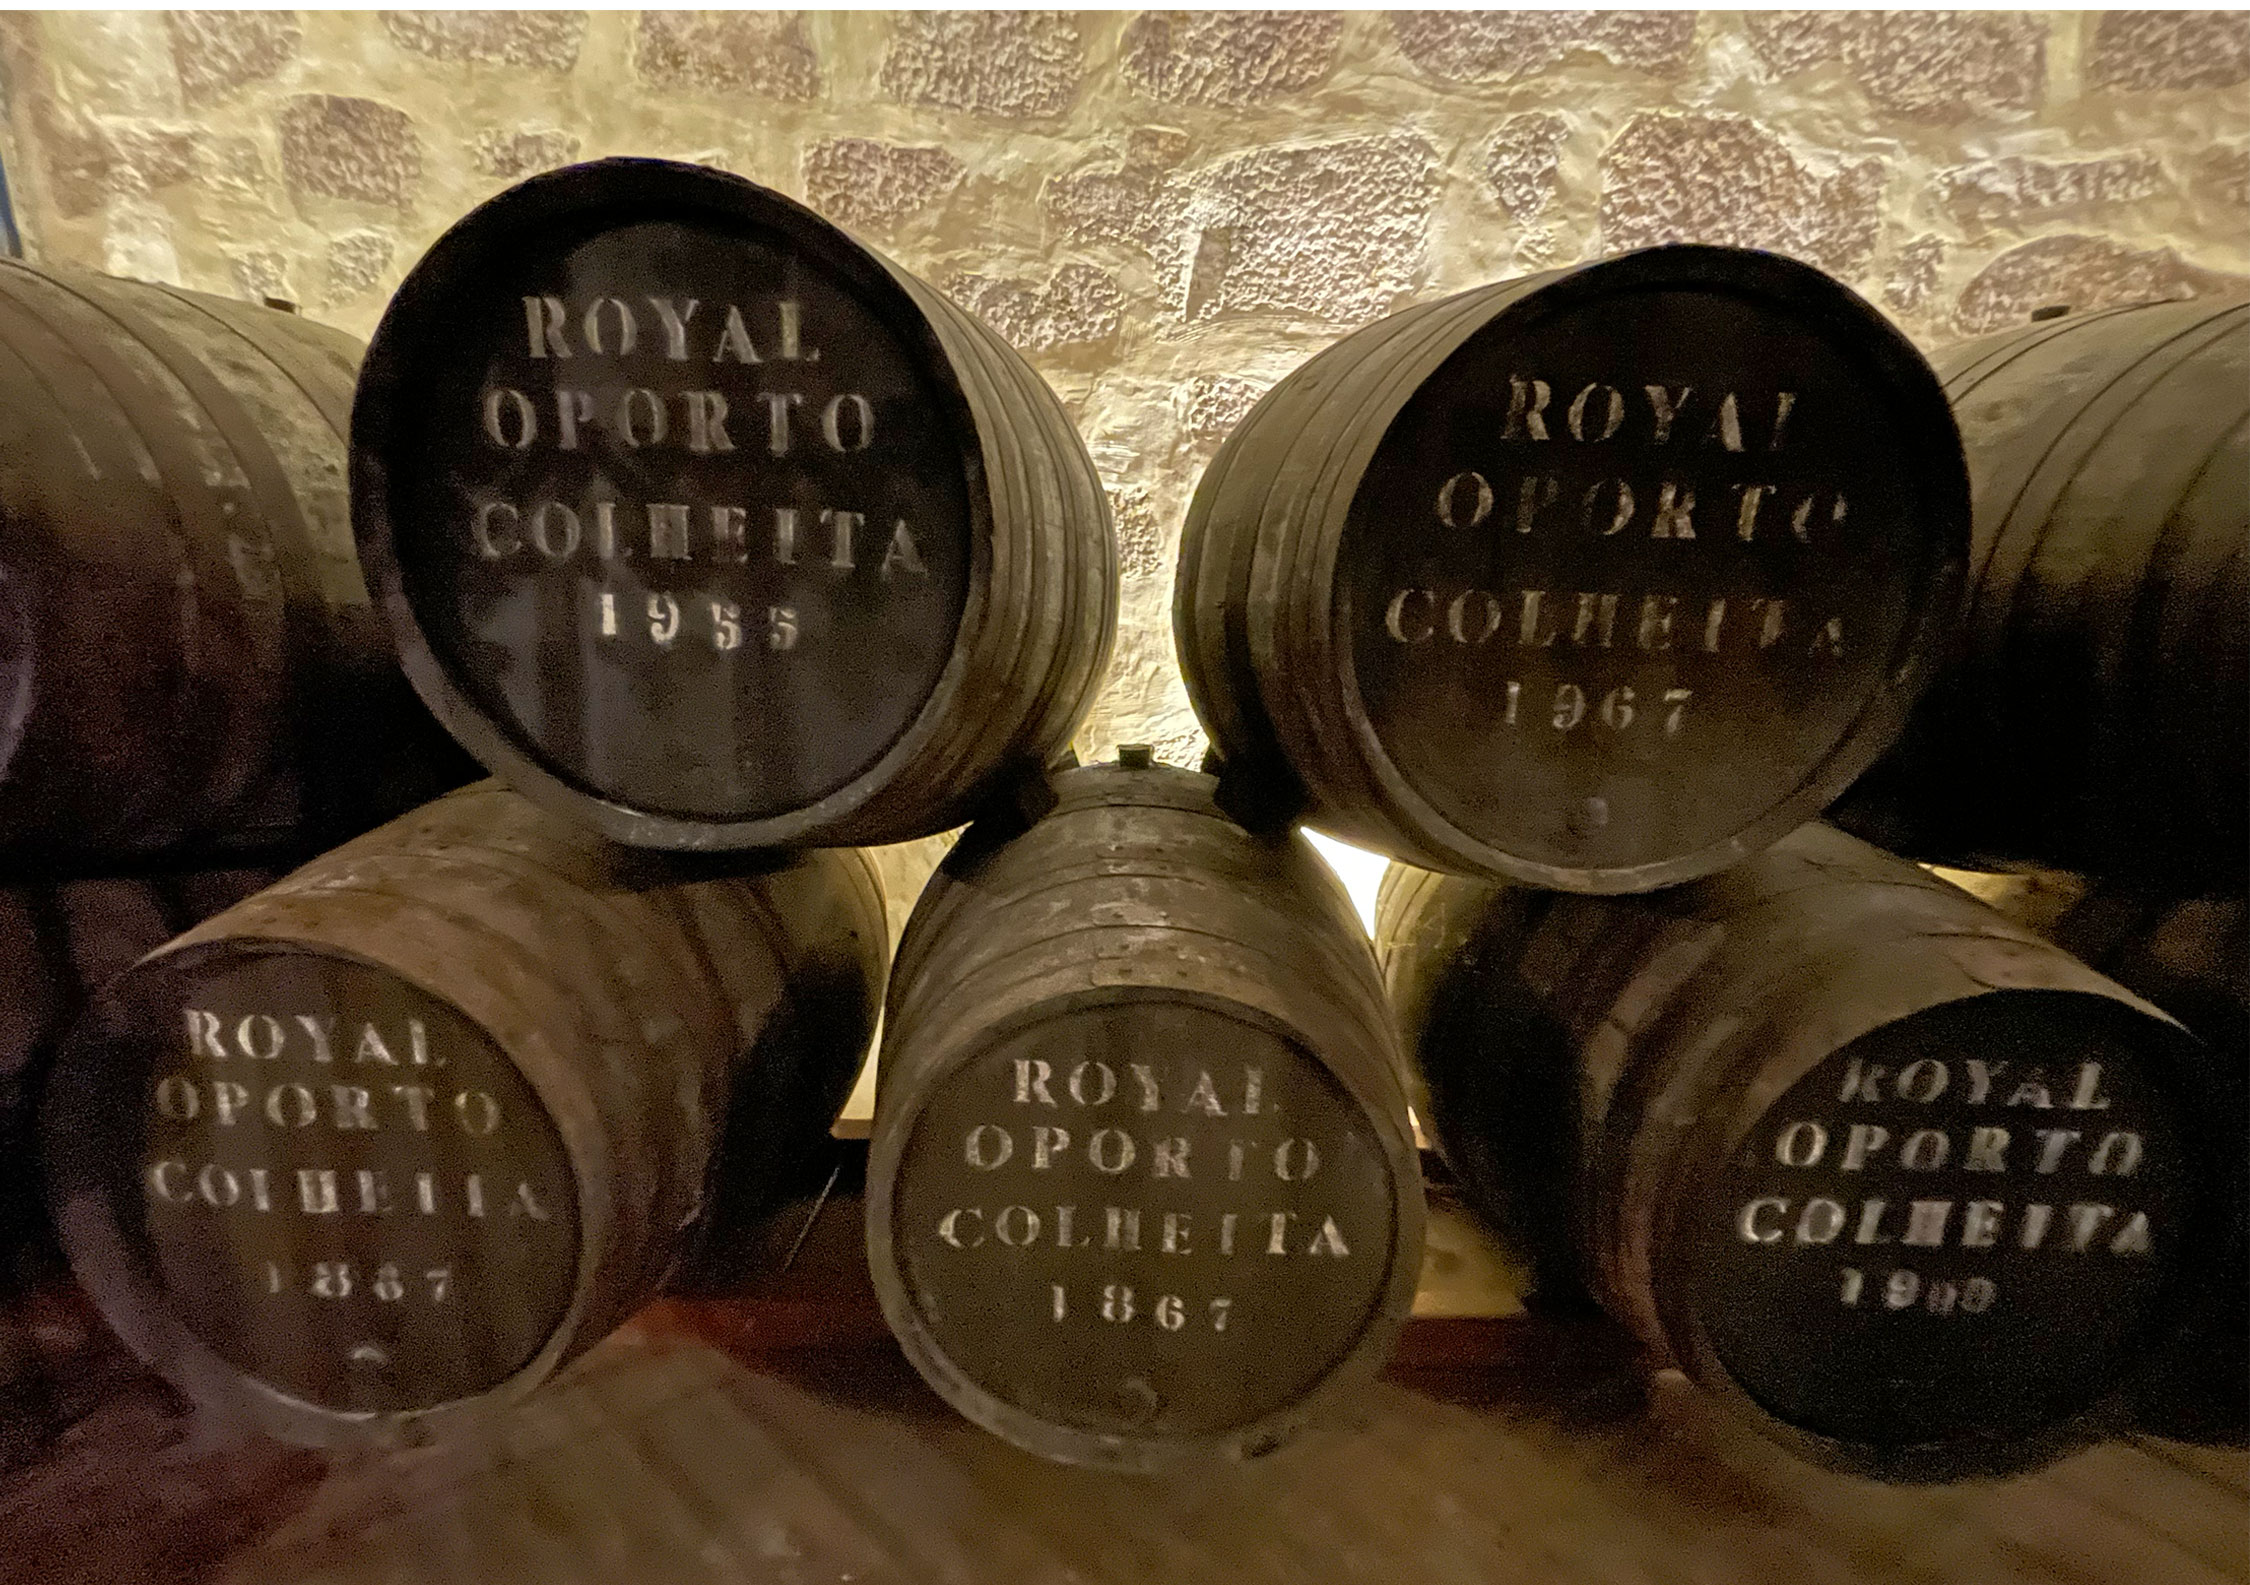 Colheita port wine, a vintage tawny | What is Port Wine? A guide by CÚRATE Trips